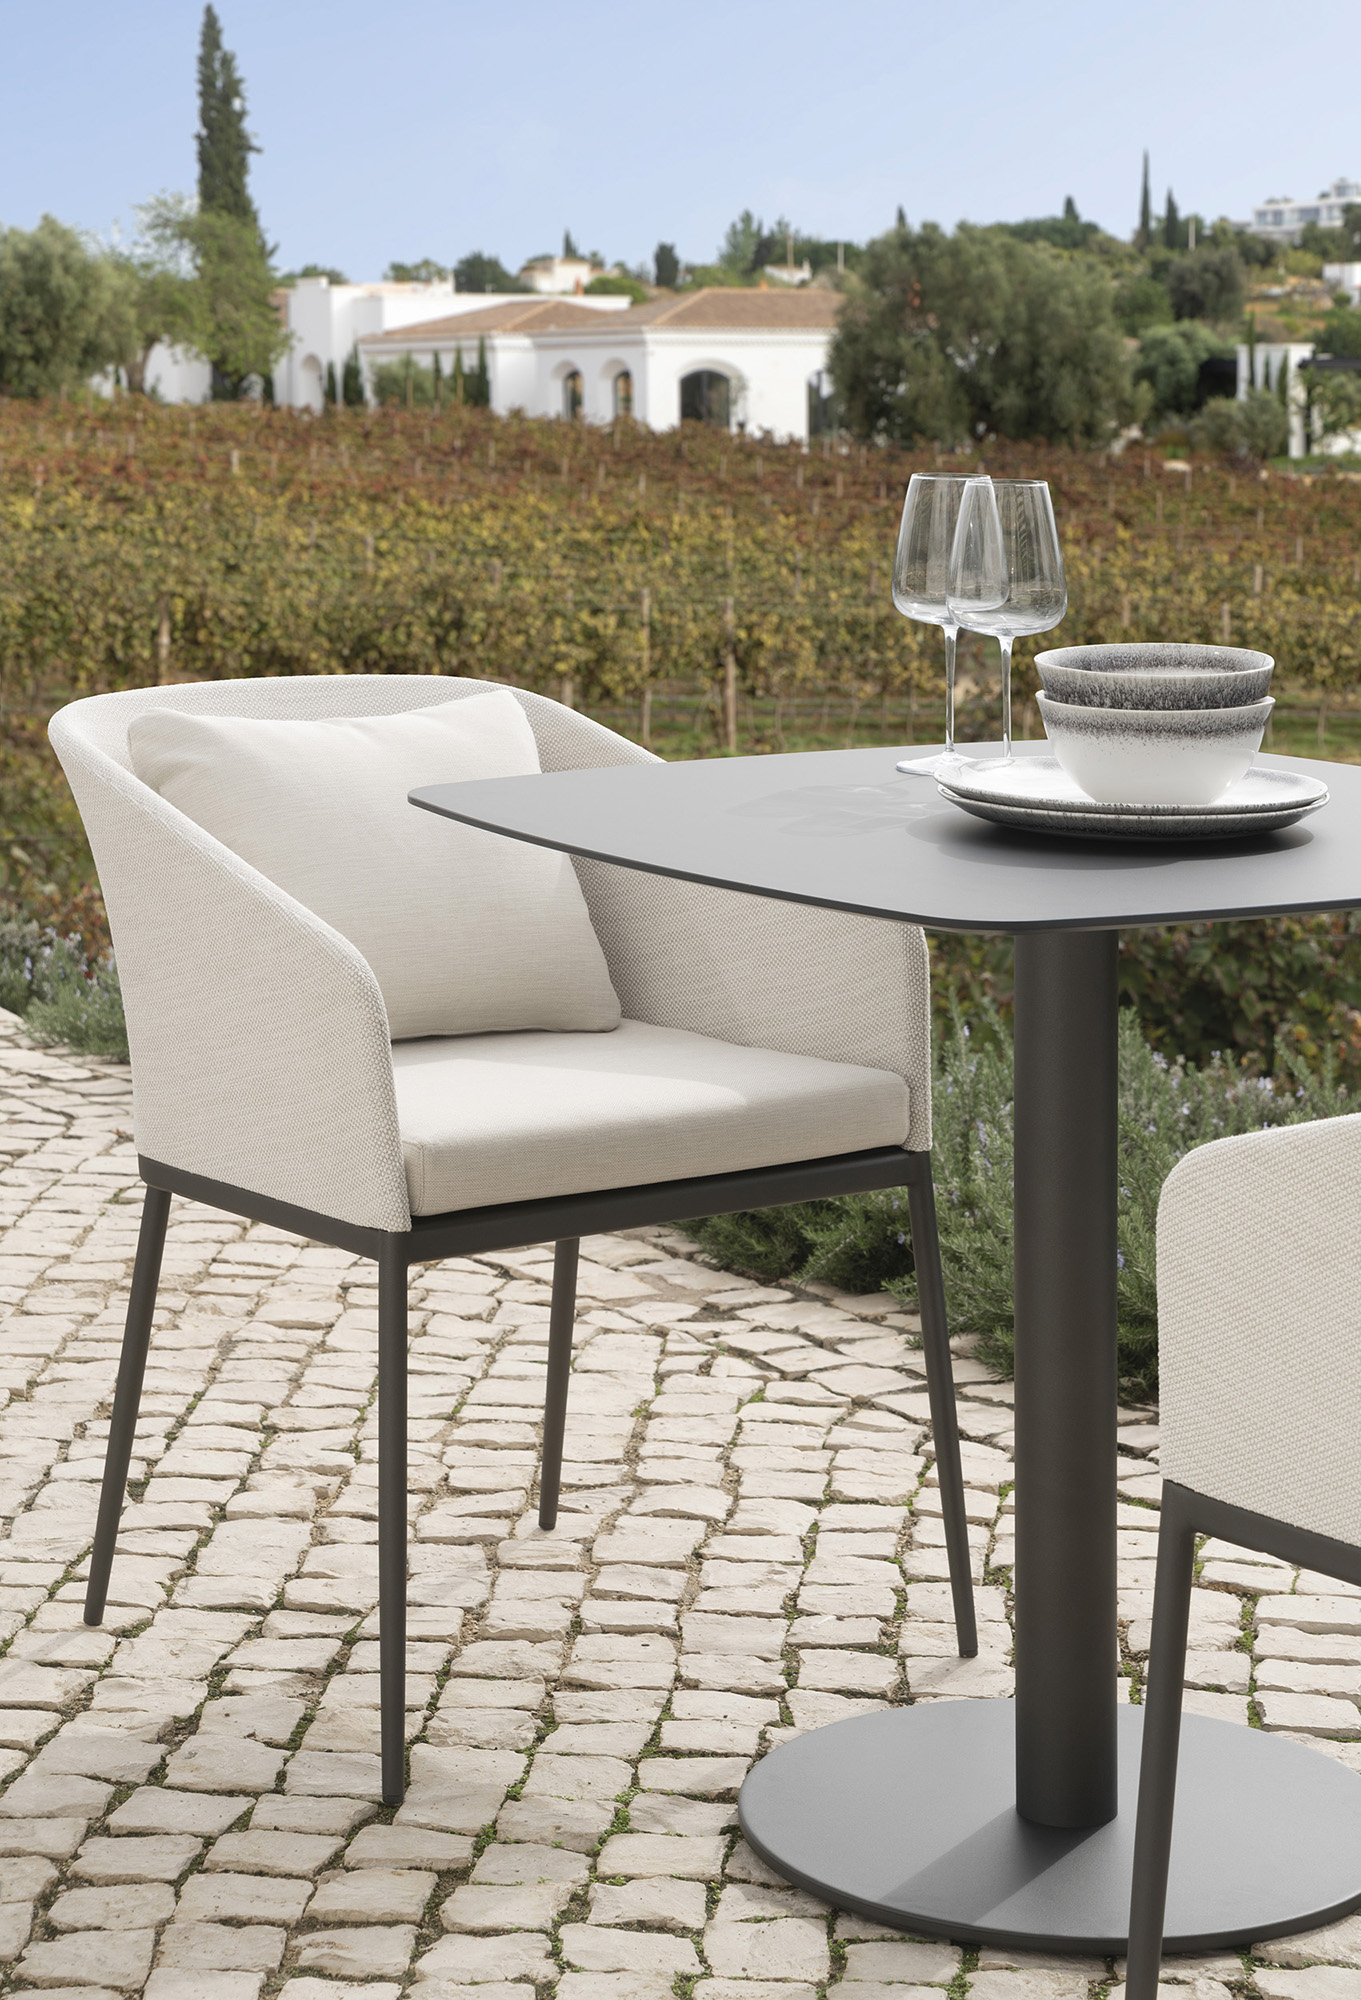 dining tables - flamingo outdoor dining table